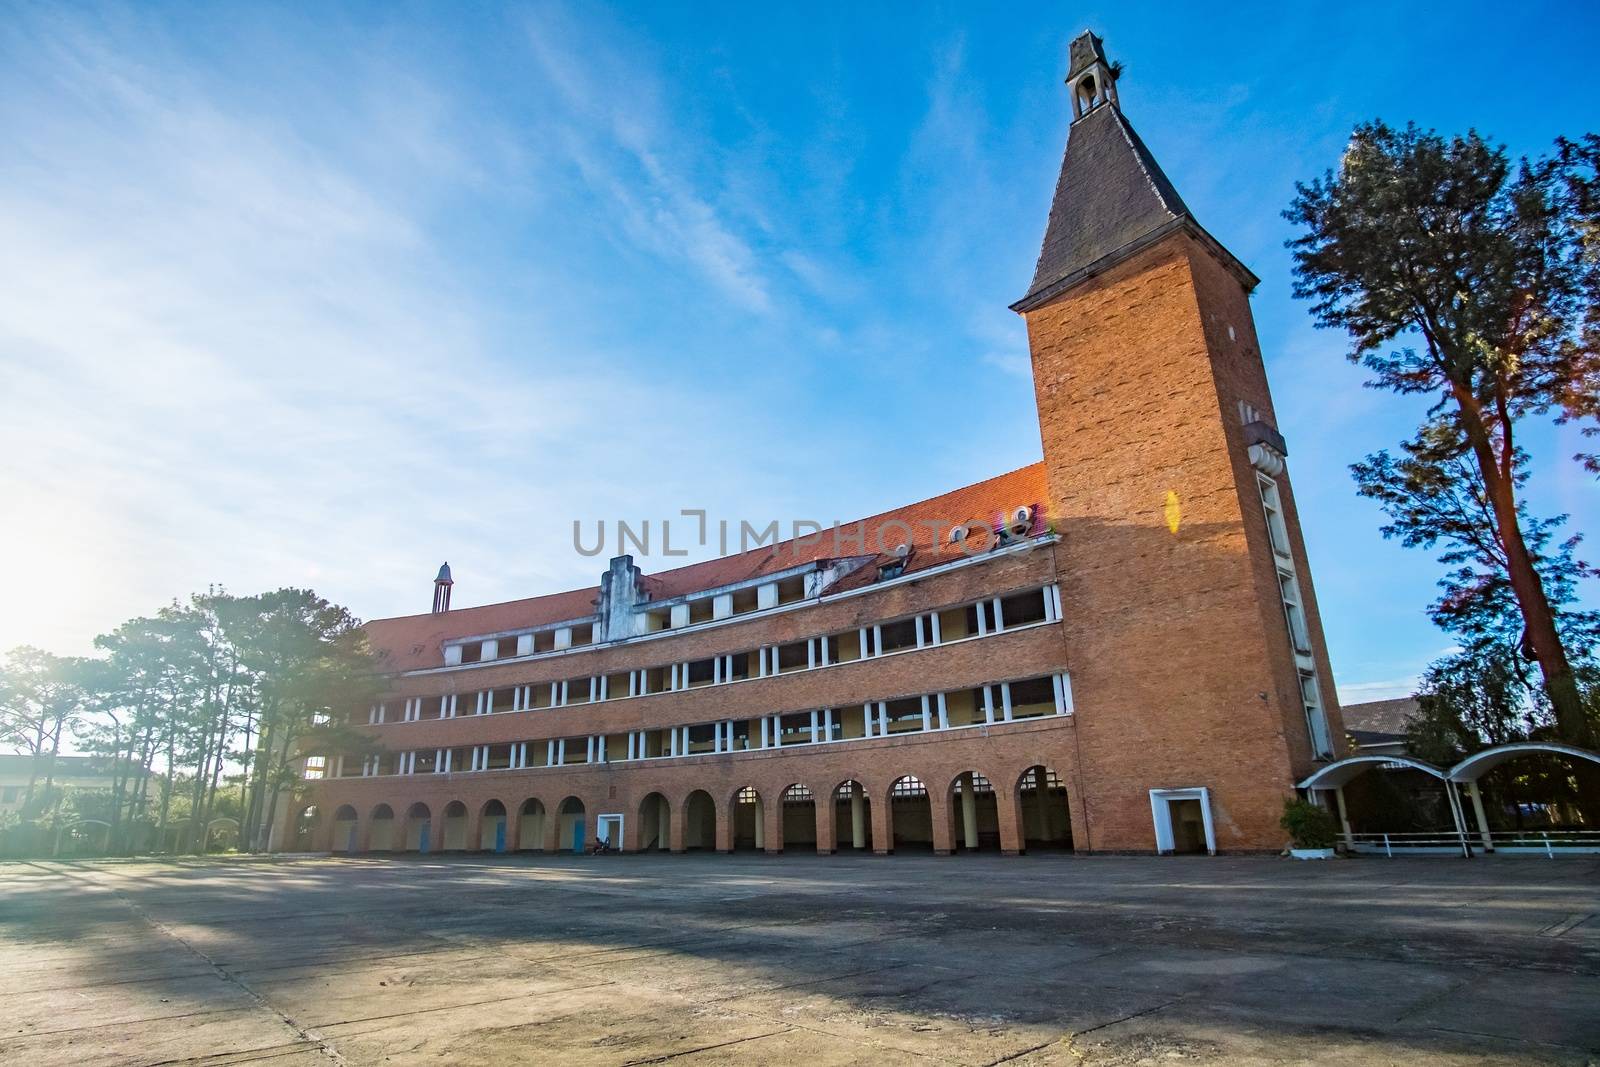 Arched architectural beauty, rustic buildings Pedagogical University in sunny with red roofing tiles impressive pines in Da Lat city, Lam Dong, Vietnam